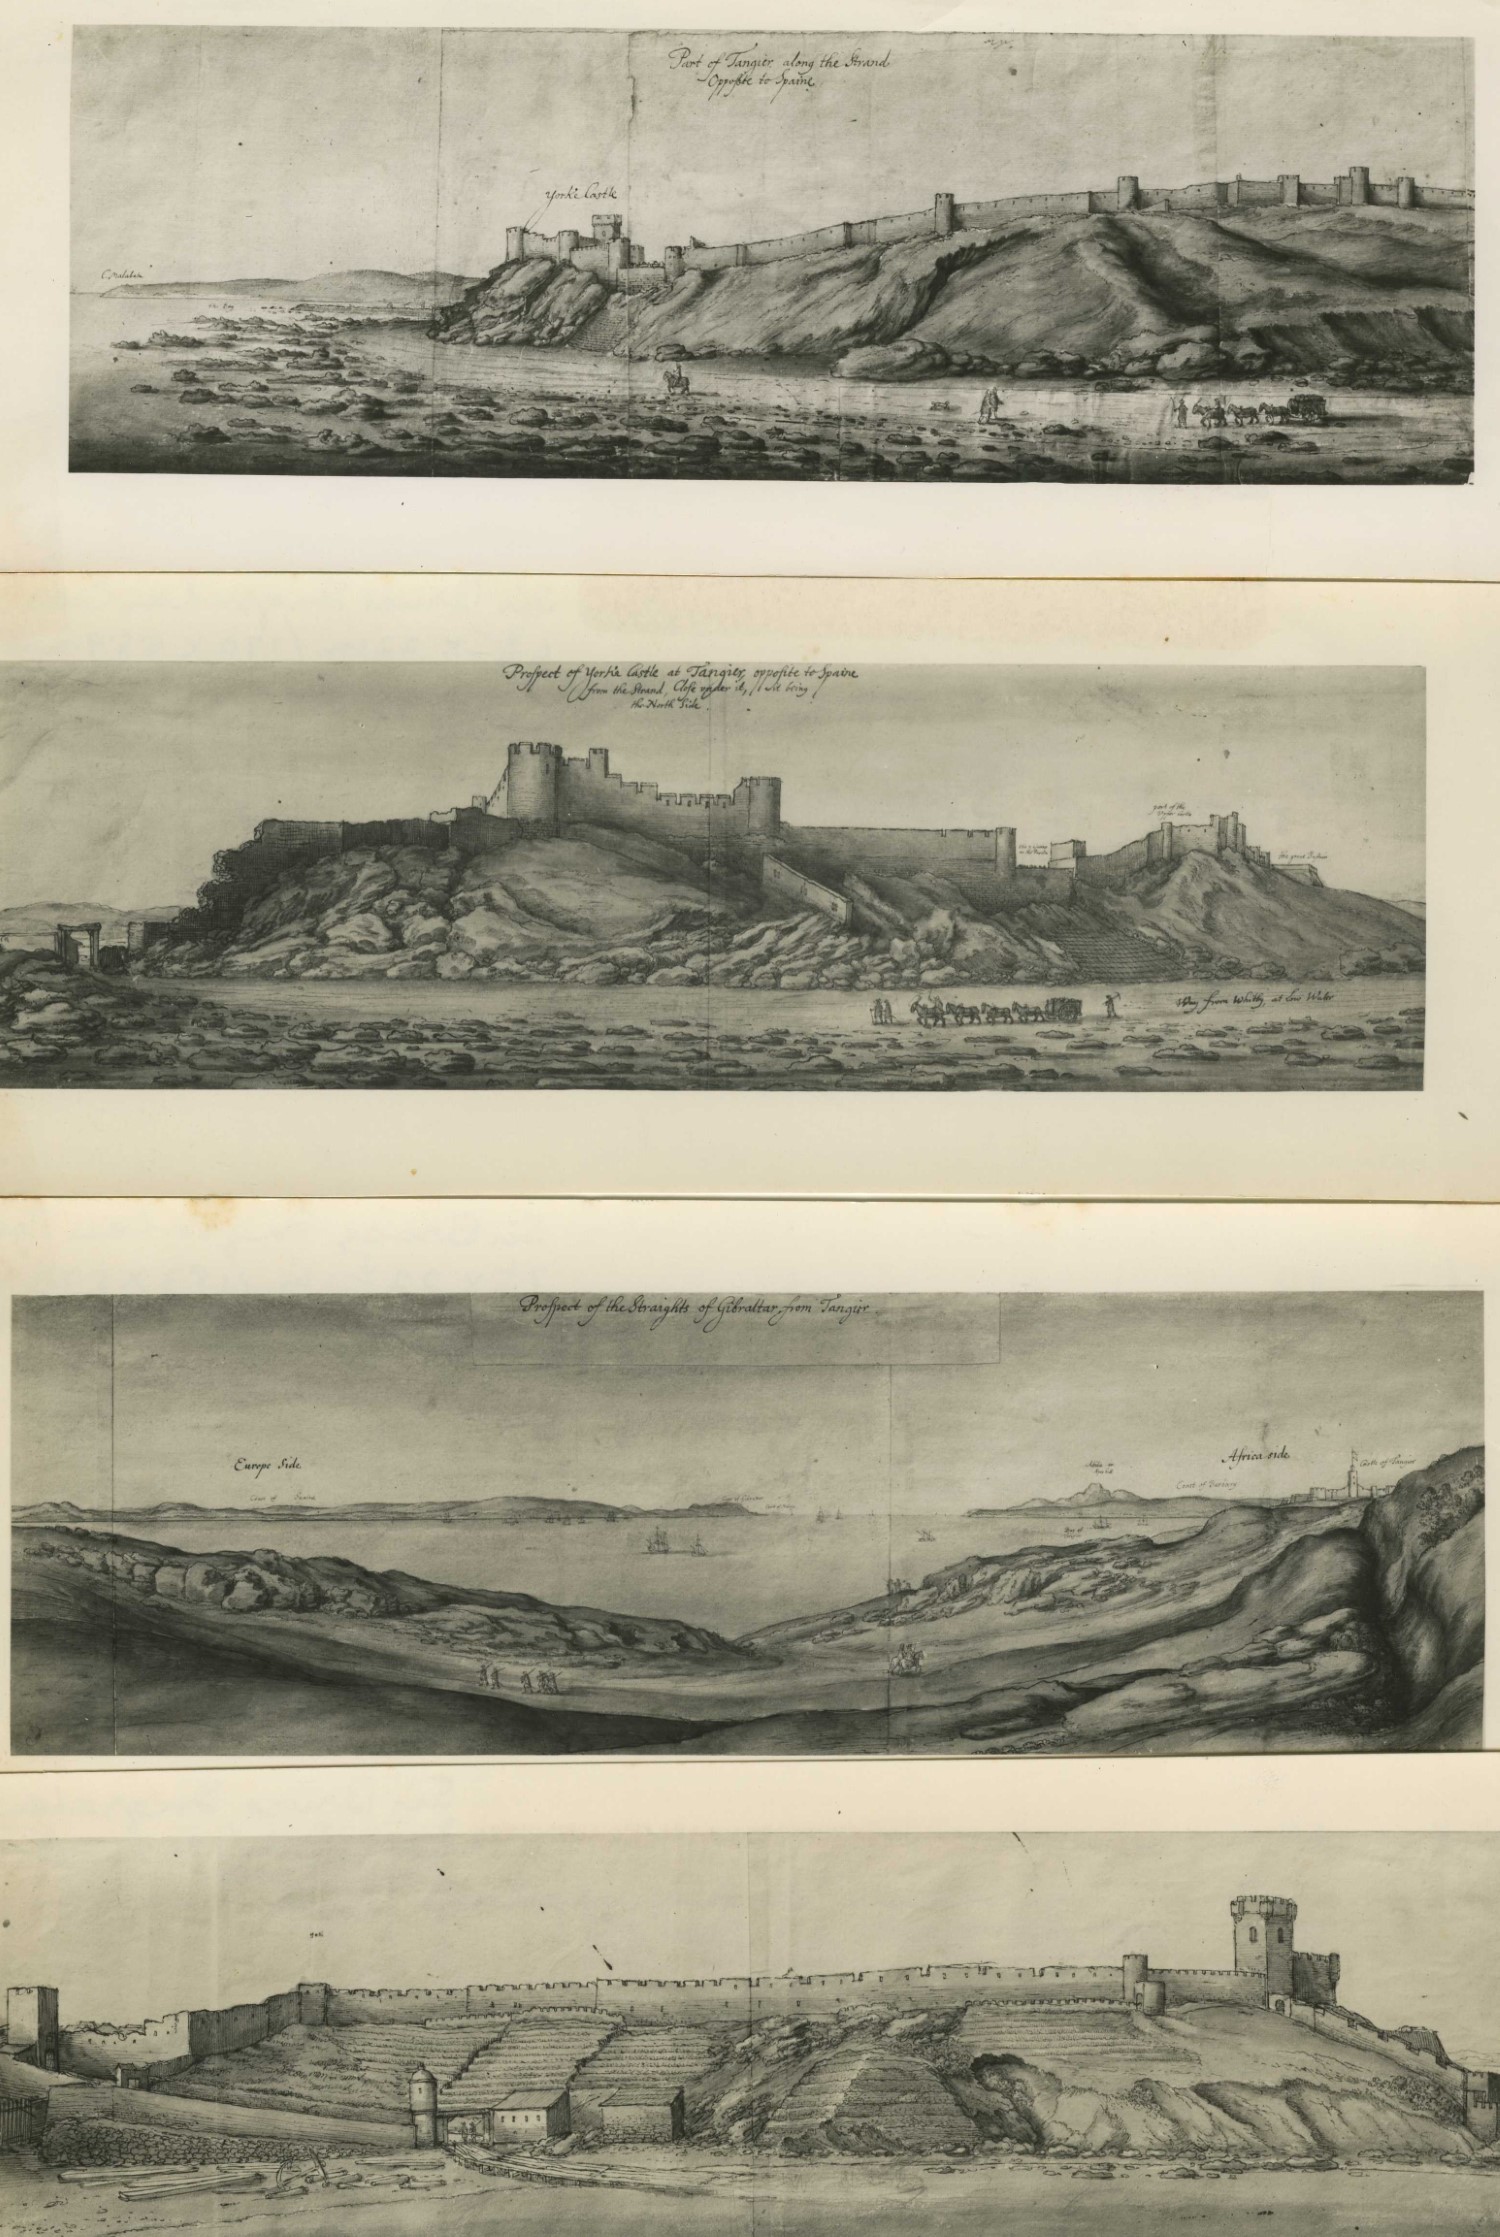 Qal'a al-Basha 'Ali Ibn 'Abd 'Allah al-Rifi - <p>Set of four engravings: First: Yorke Castle, part of Tangier along the Strand, opposite to Spain Second: Prospect of Yorke Castle at Tangier Third: Prospect of the straits of Gibraltar from Tangier Fourth:The entrance to the fortifications of the Yorke Castle in Tangier</p>